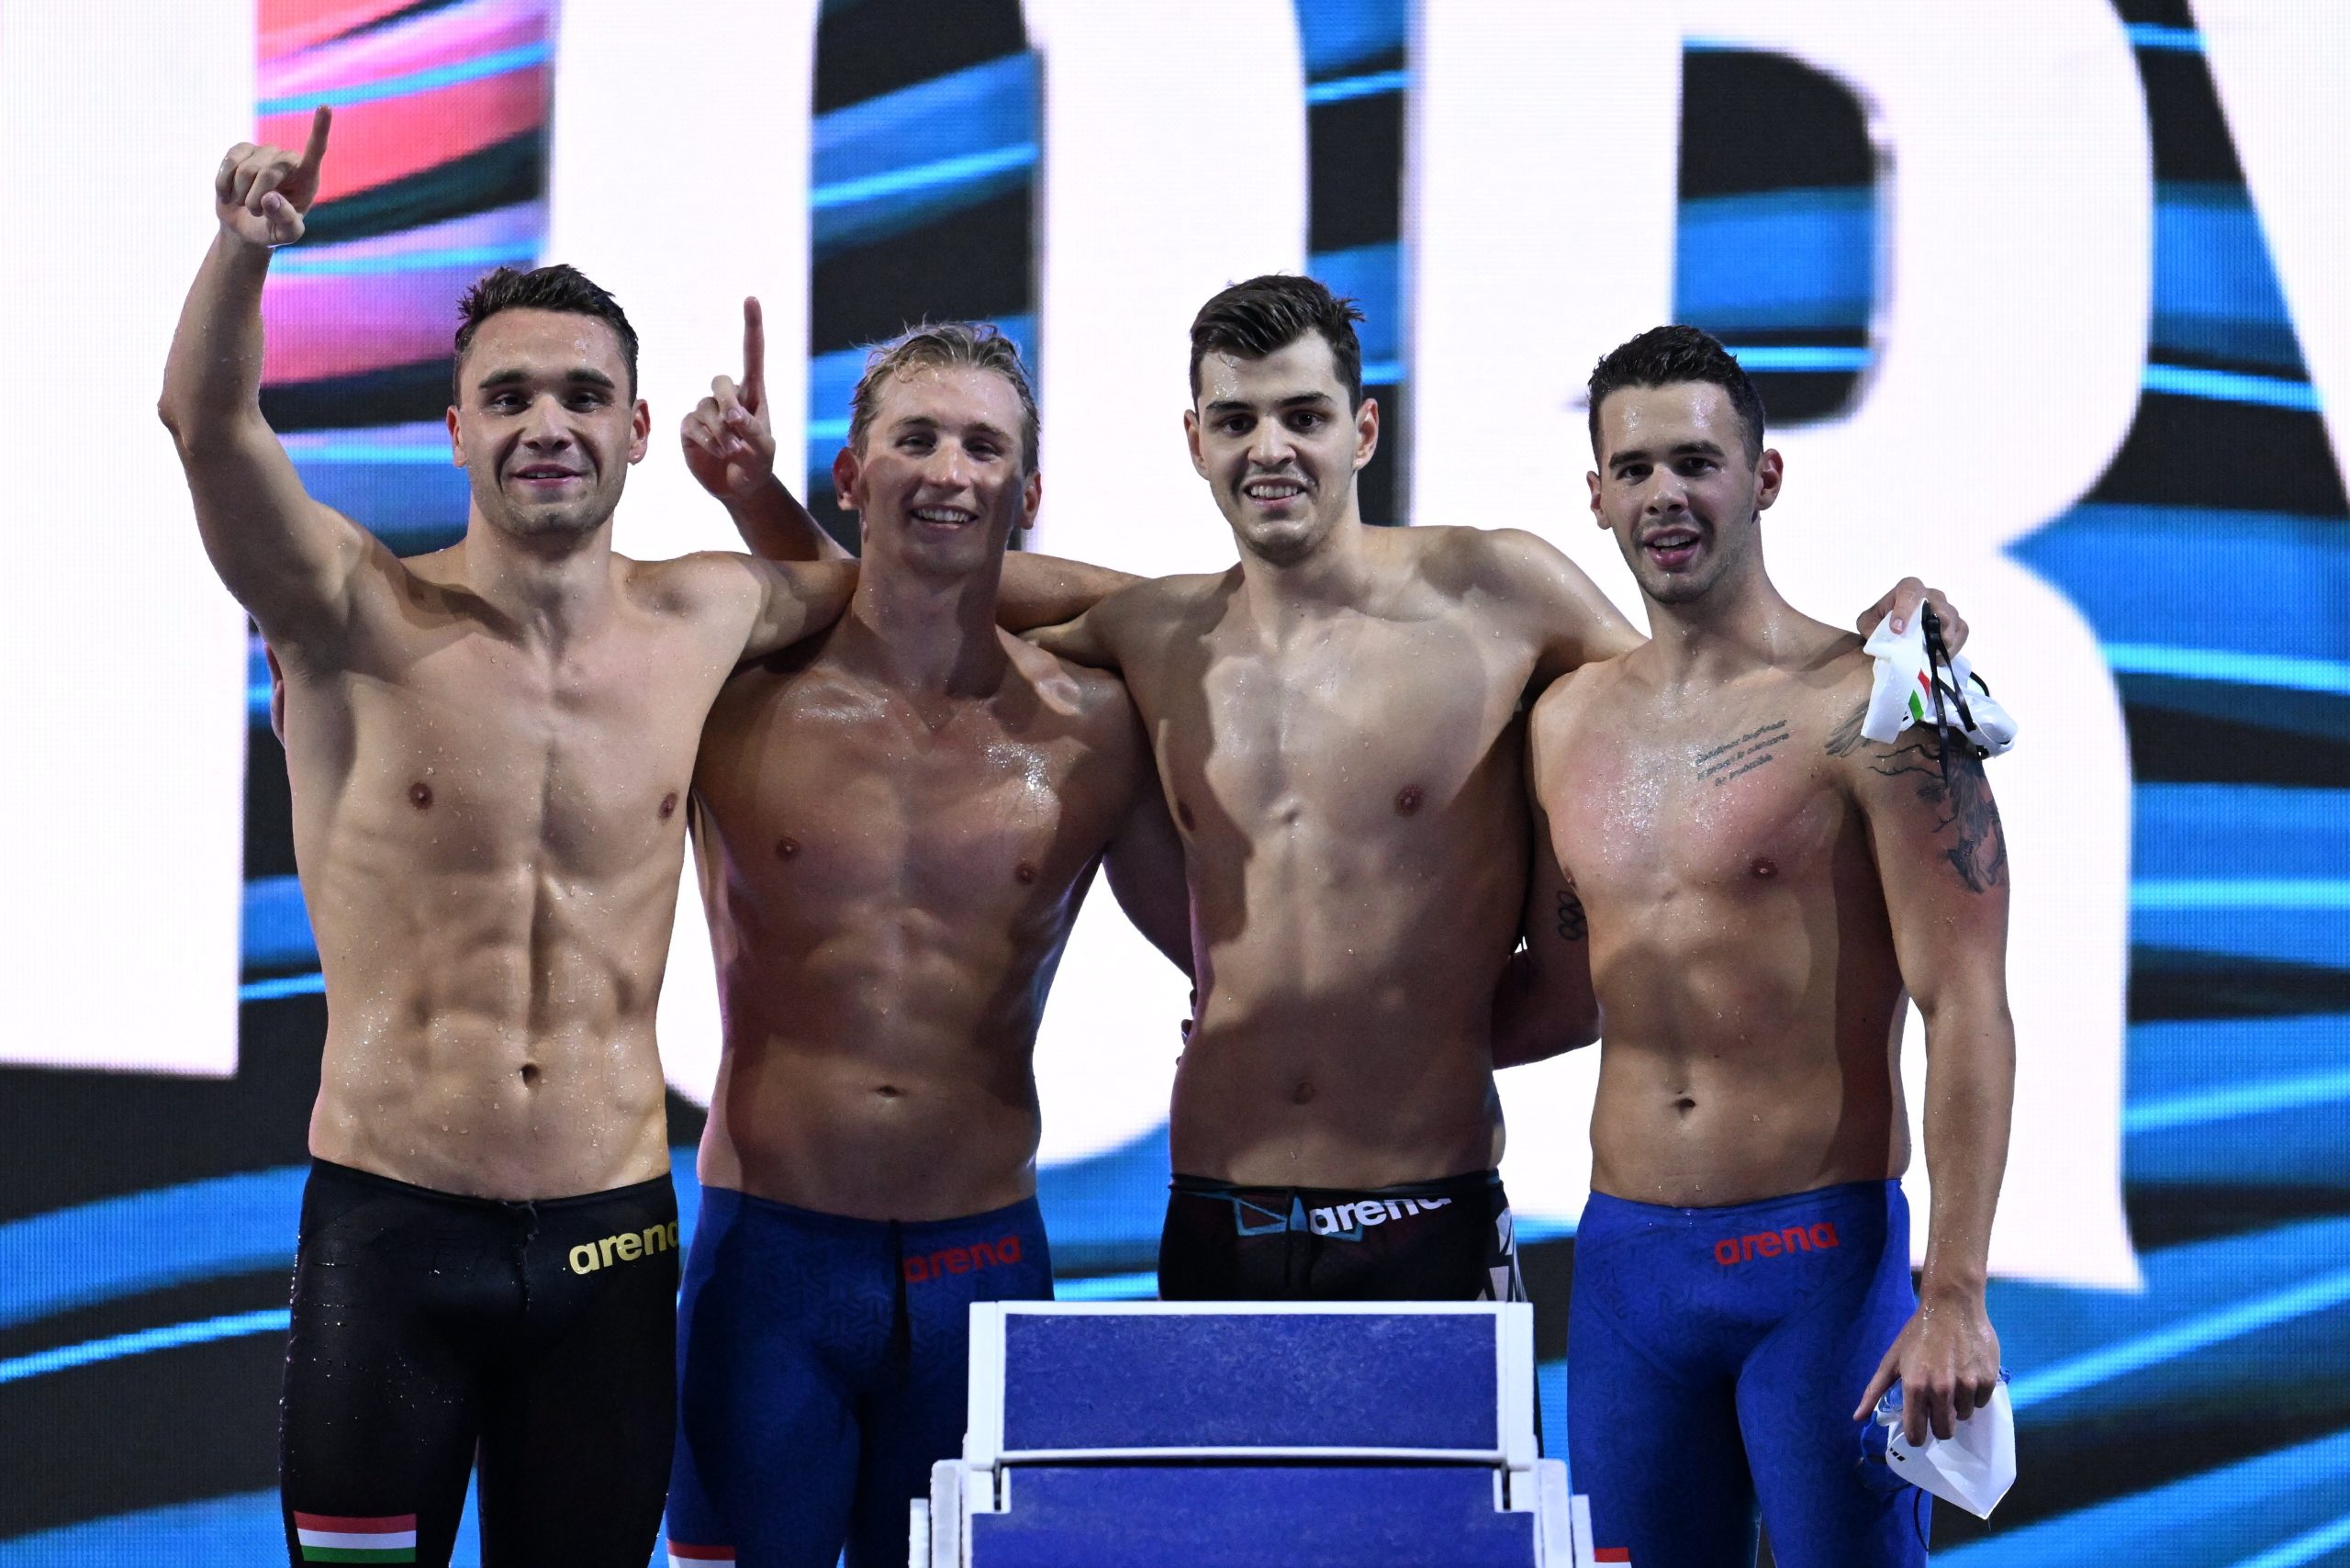 Hungarian Men’s 4x200 Freestyle Relay Team Finished Fifth with National Record